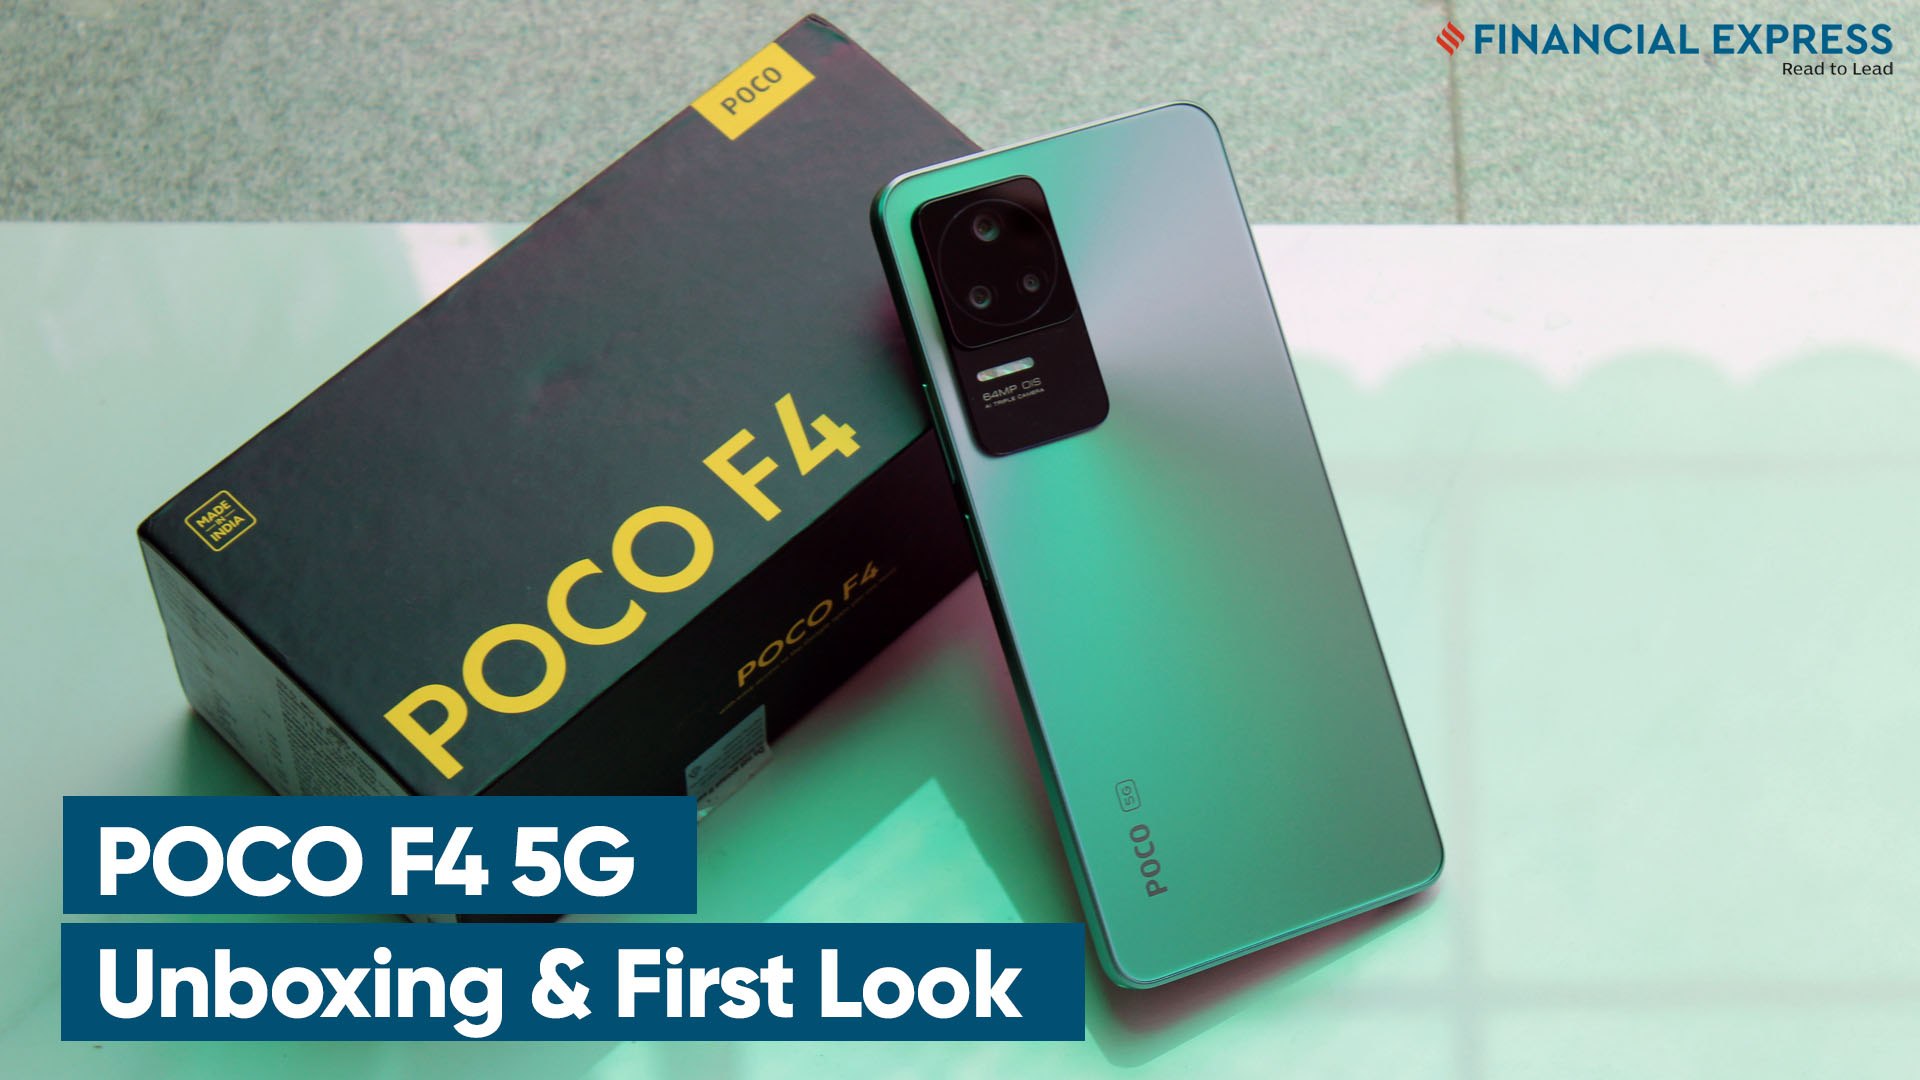 POCO X5 5G Unboxing - Full Specs and First Impressions! 